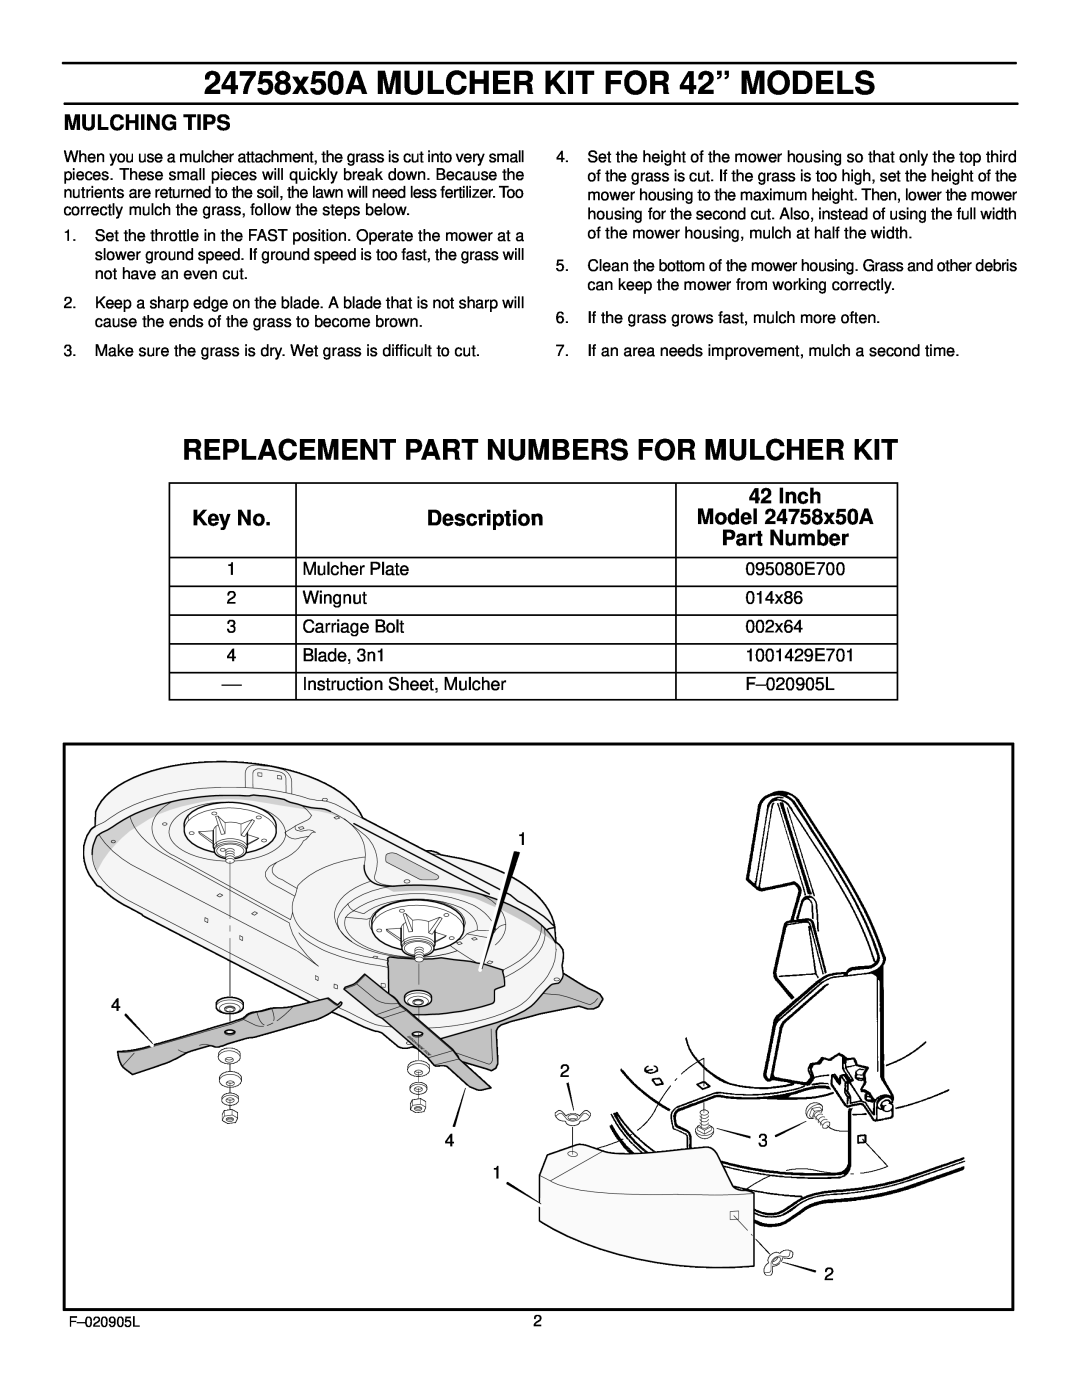 Rover manual Mulching Tips, Inch, Description, Model 24758x50A, Part Number, 24758x50A MULCHER KIT FOR 42” MODELS 